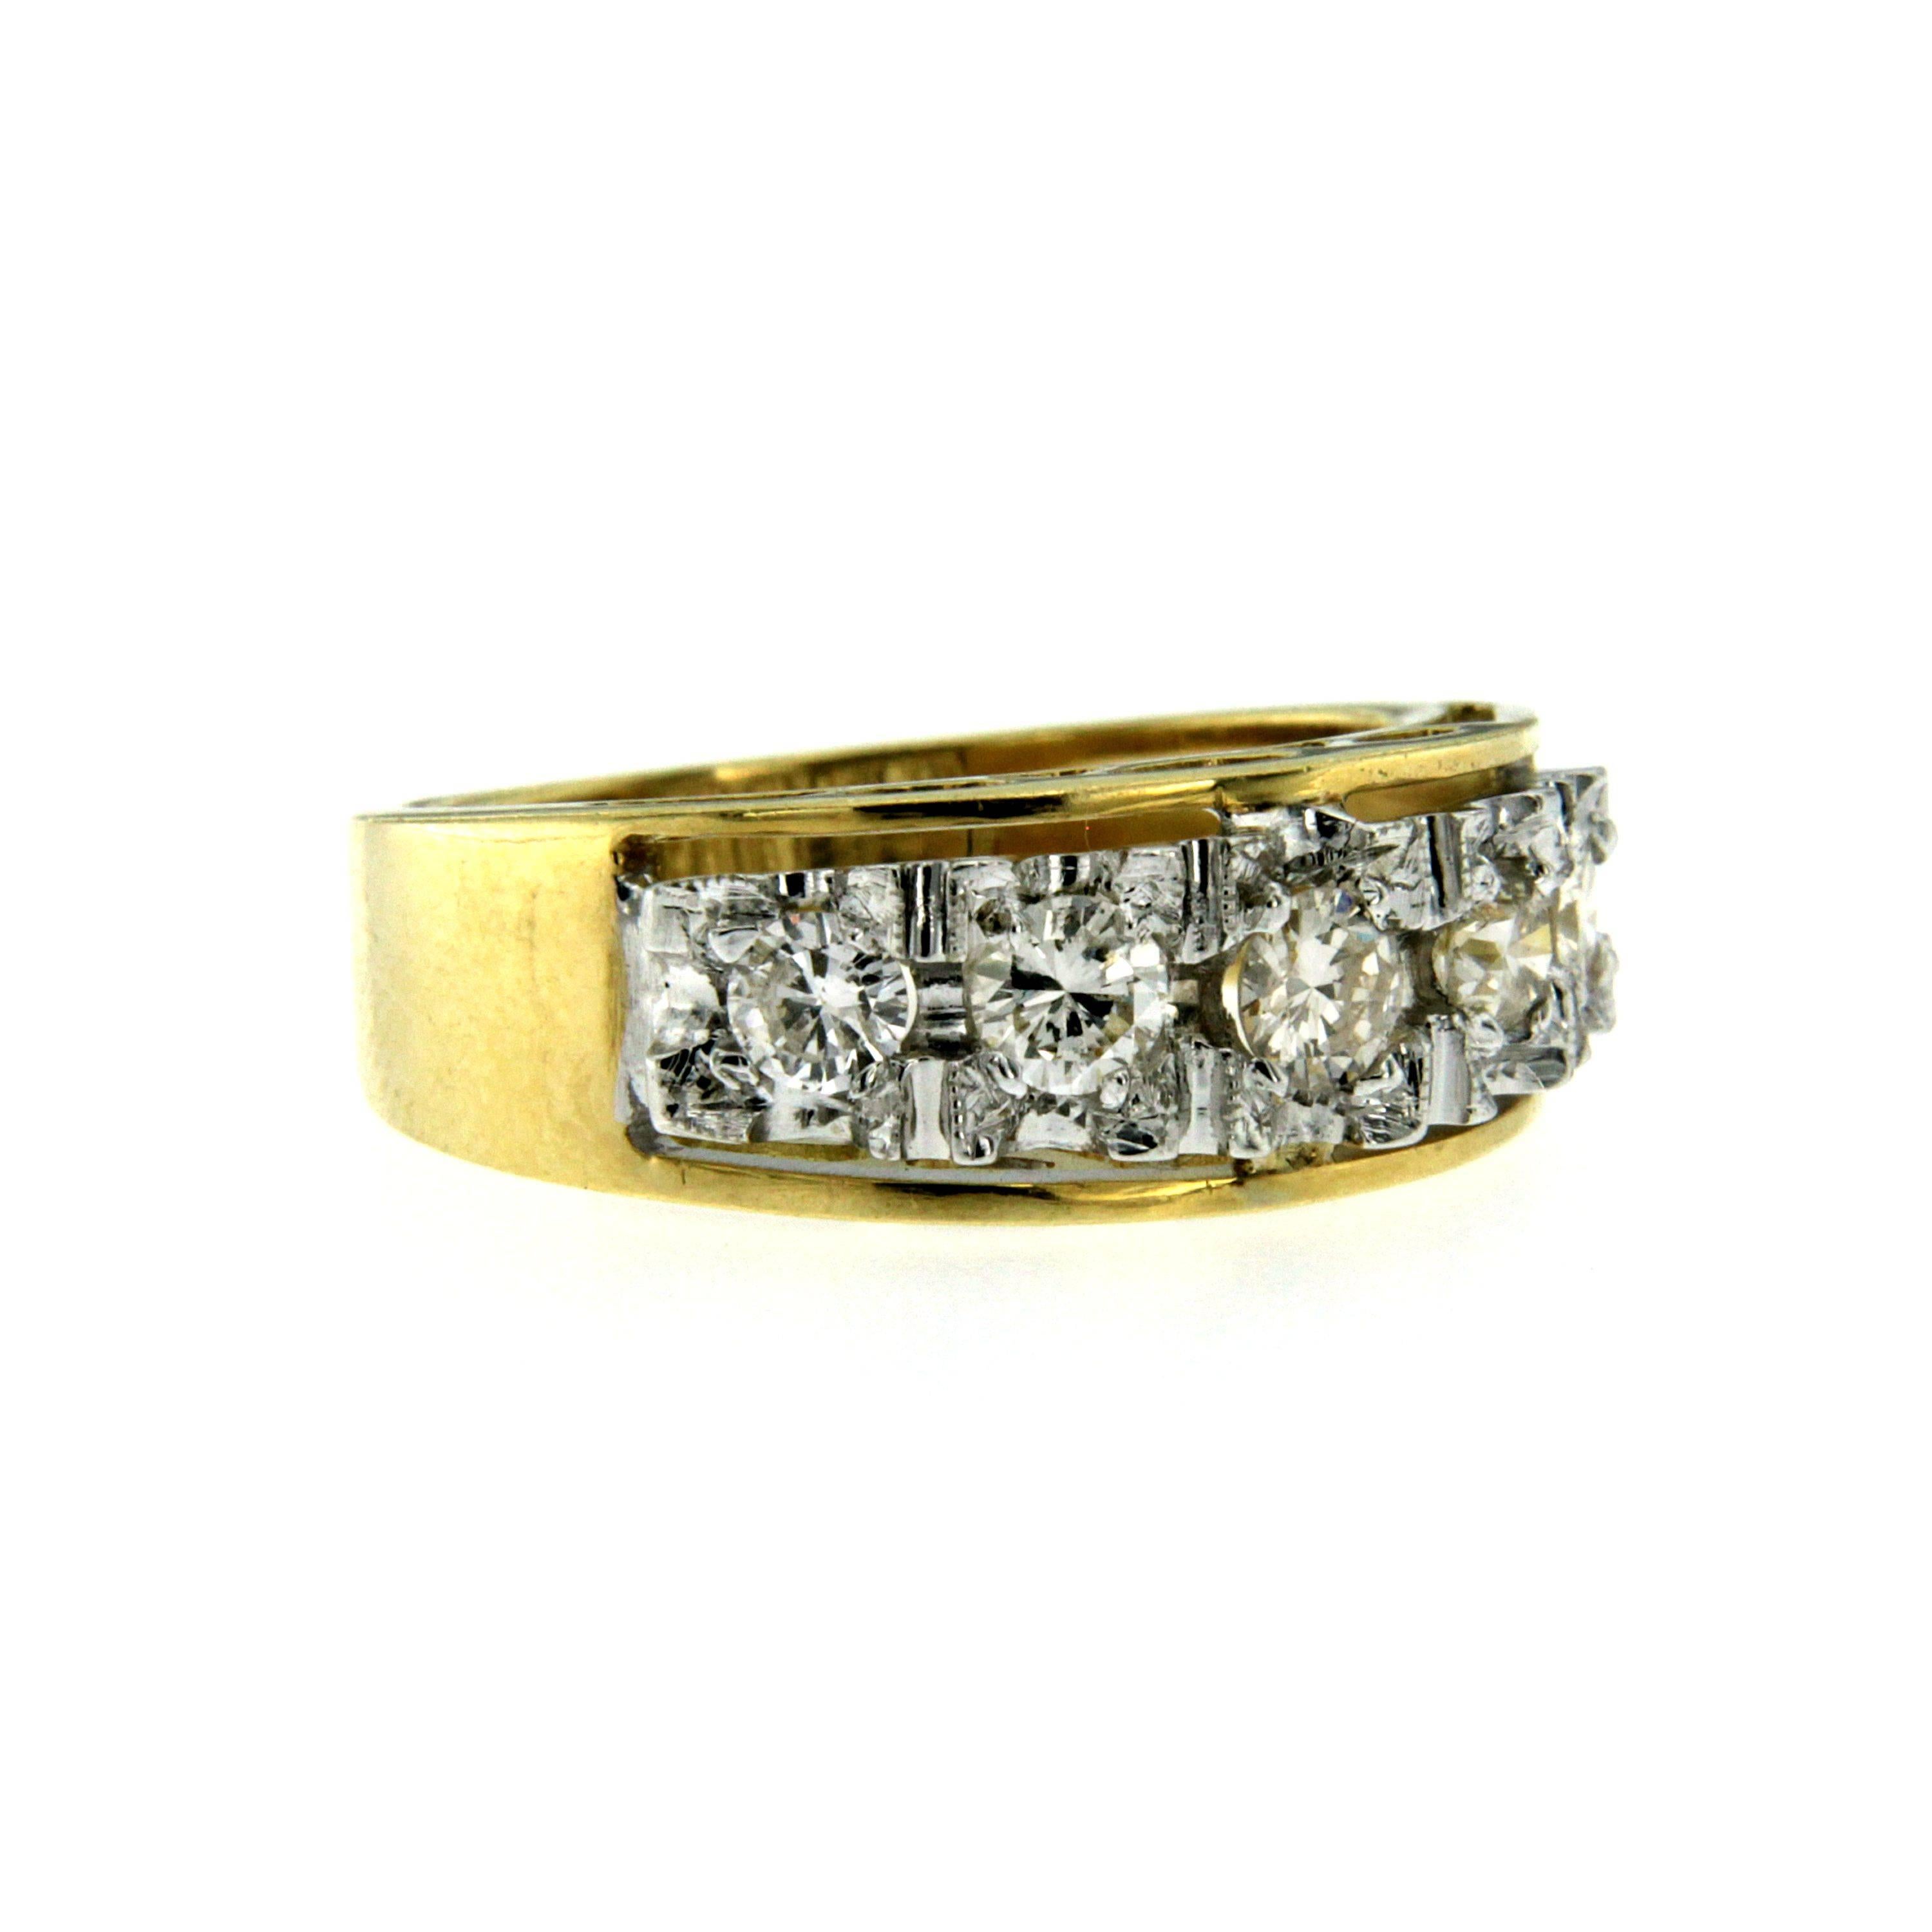 An exquisite diamond band ring set with five brilliant cut shiny and sparkly Diamonds totalling 0.75 ct. estimated to be H/I in Color and VS in clarity.
The Band is 18k yellow Gold, and the Diamonds are set in 18k white Gold. Circa 1950

CONDITION: